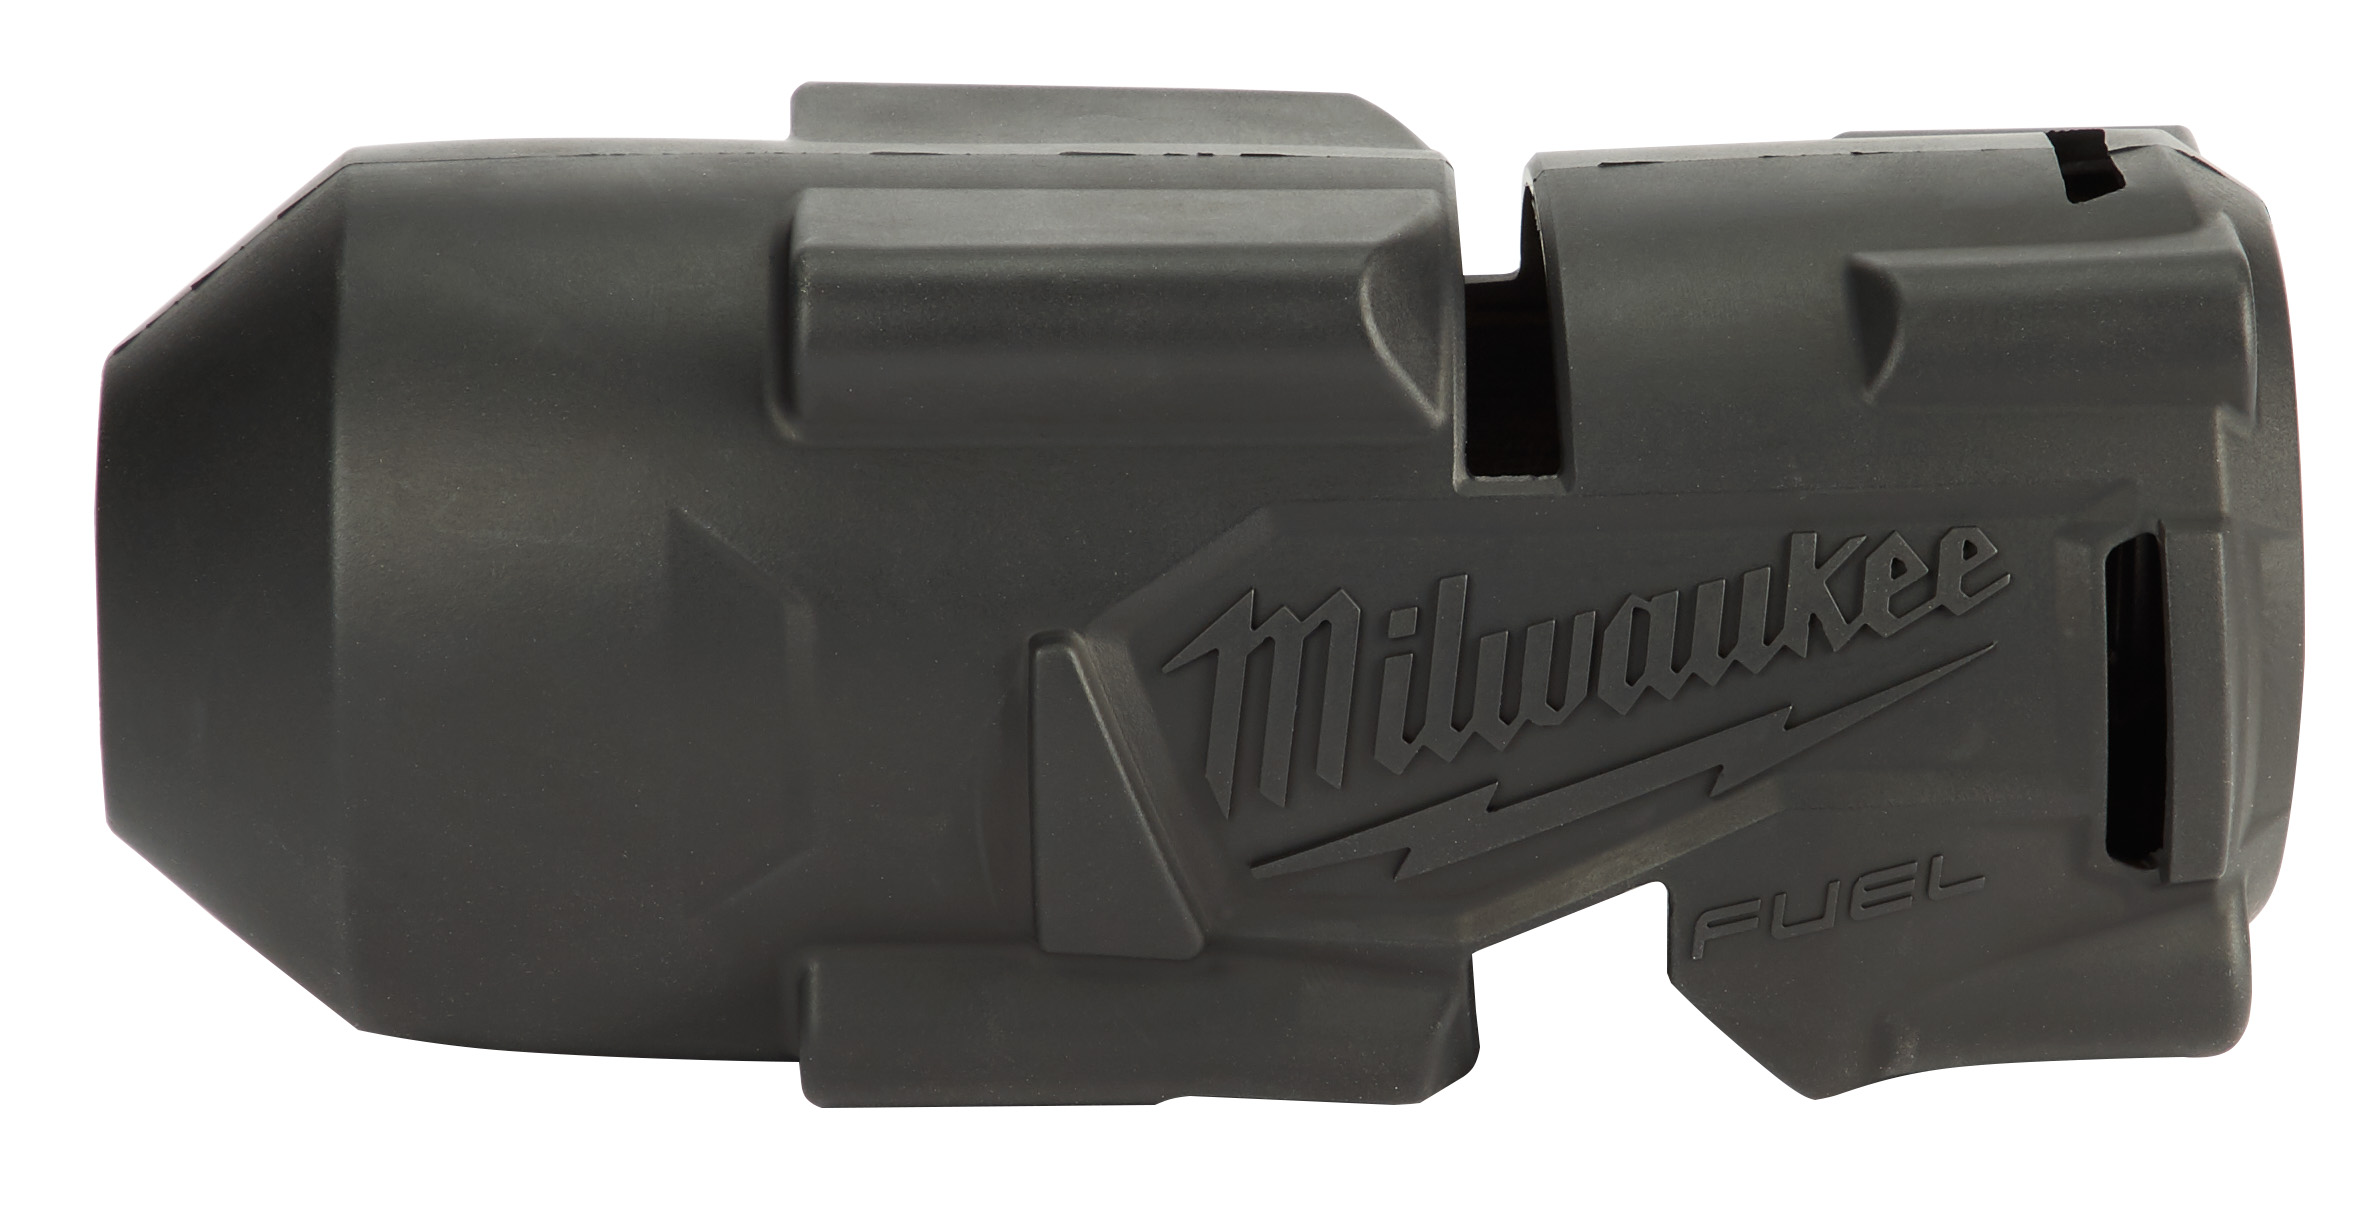 The Milwaukee 49-16-2766 tool boot is for use with the M18 FUEL™ high torque impact wrench (2766-20 & 2862-20) only. This product provides a lightweight, durable solution that is meant to protect the tool and work surface. A durable rubber design will withstand corrosive materials commonly found in maintenance environments. Not for use on or near live electrical circuits. Use on any other product may result in damage to tool motor and may void tool warranty.